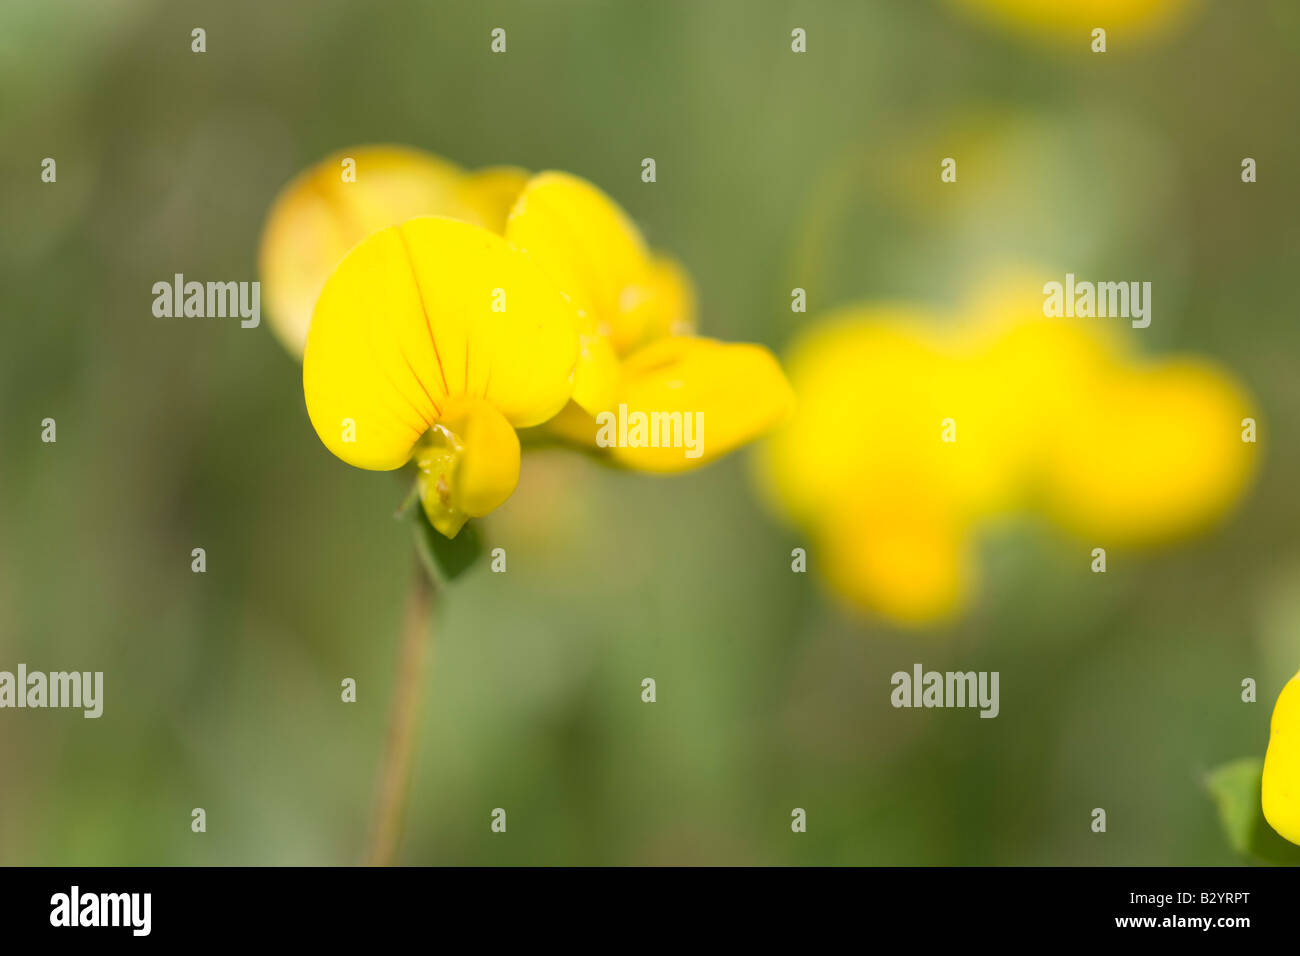 Meadow Vetchling, a member of pea family. yellow flower Stock Photo